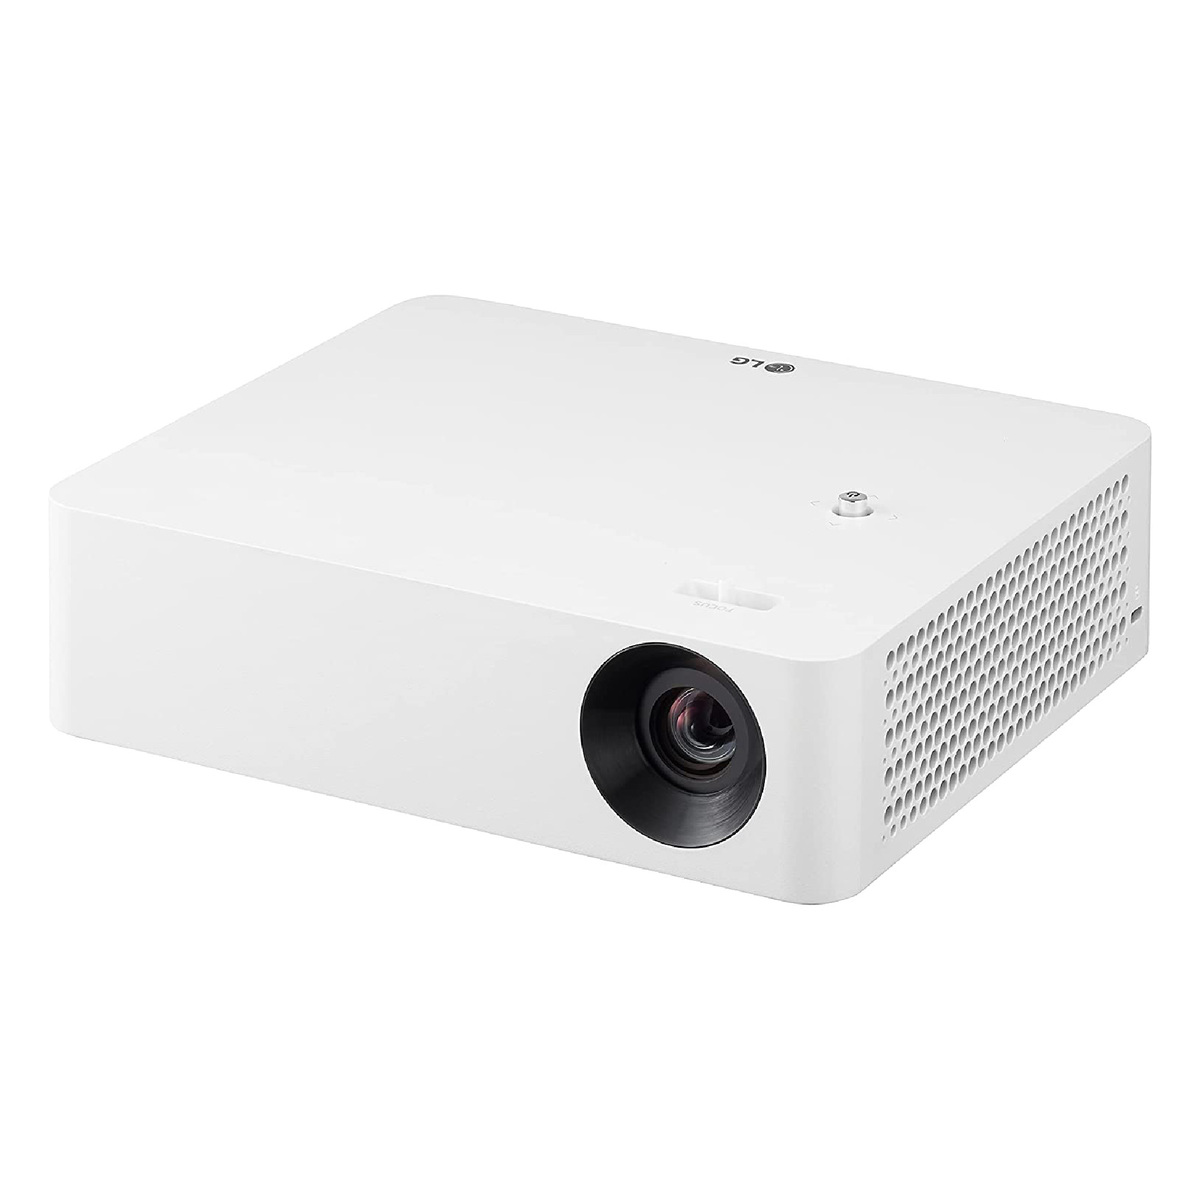 LG Portable Smart Home Theater CineBeam Projector PF610P